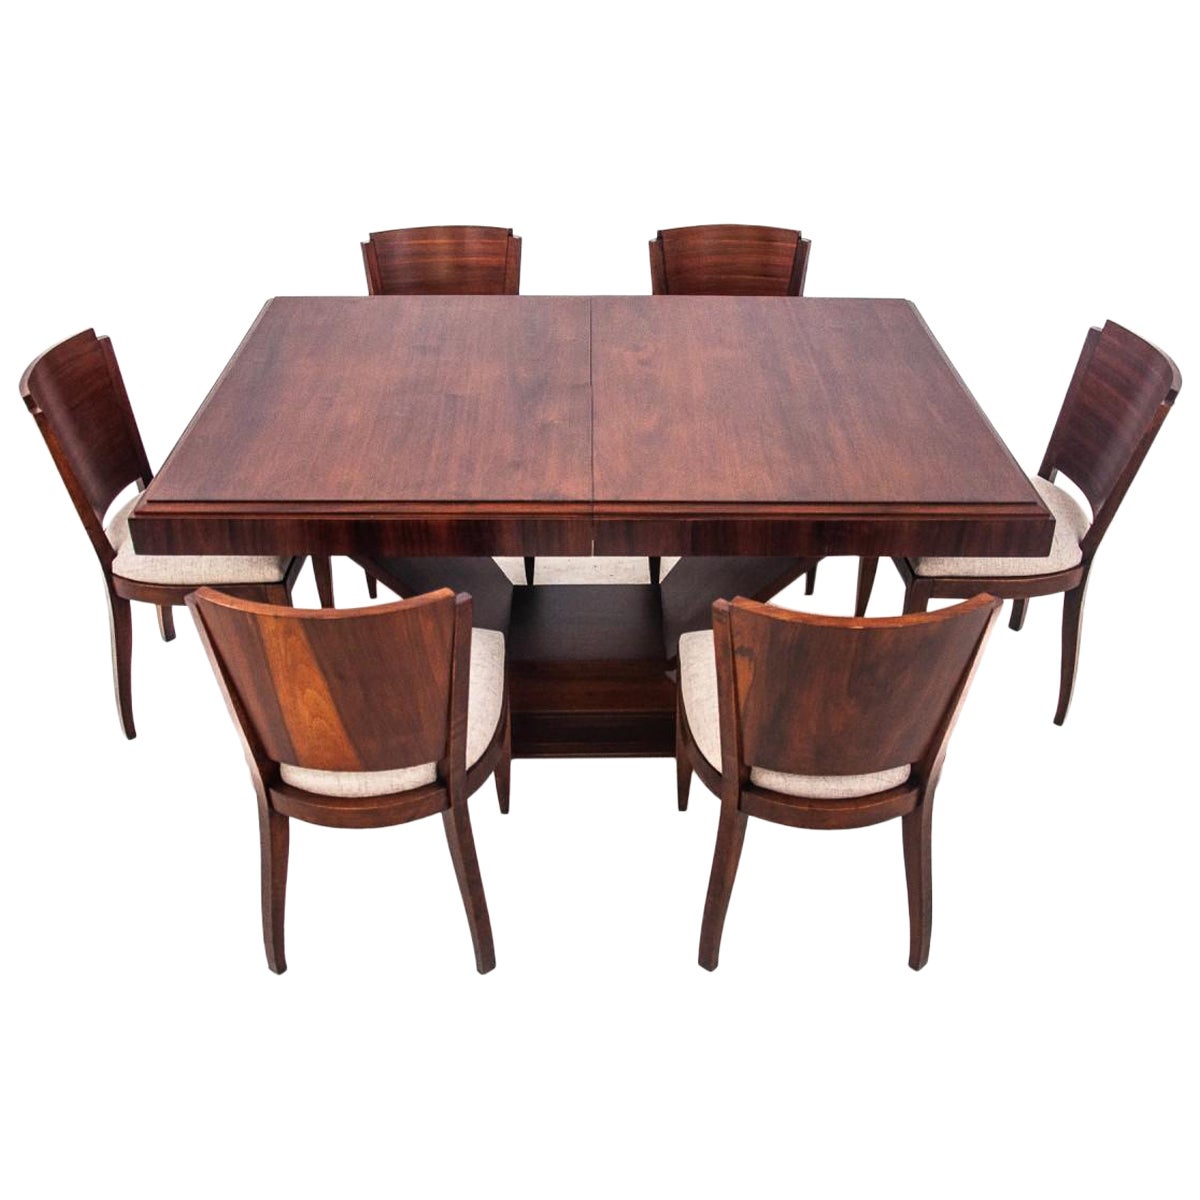 French Art Deco Louis Majorelle Walnut Dining Table with Chairs